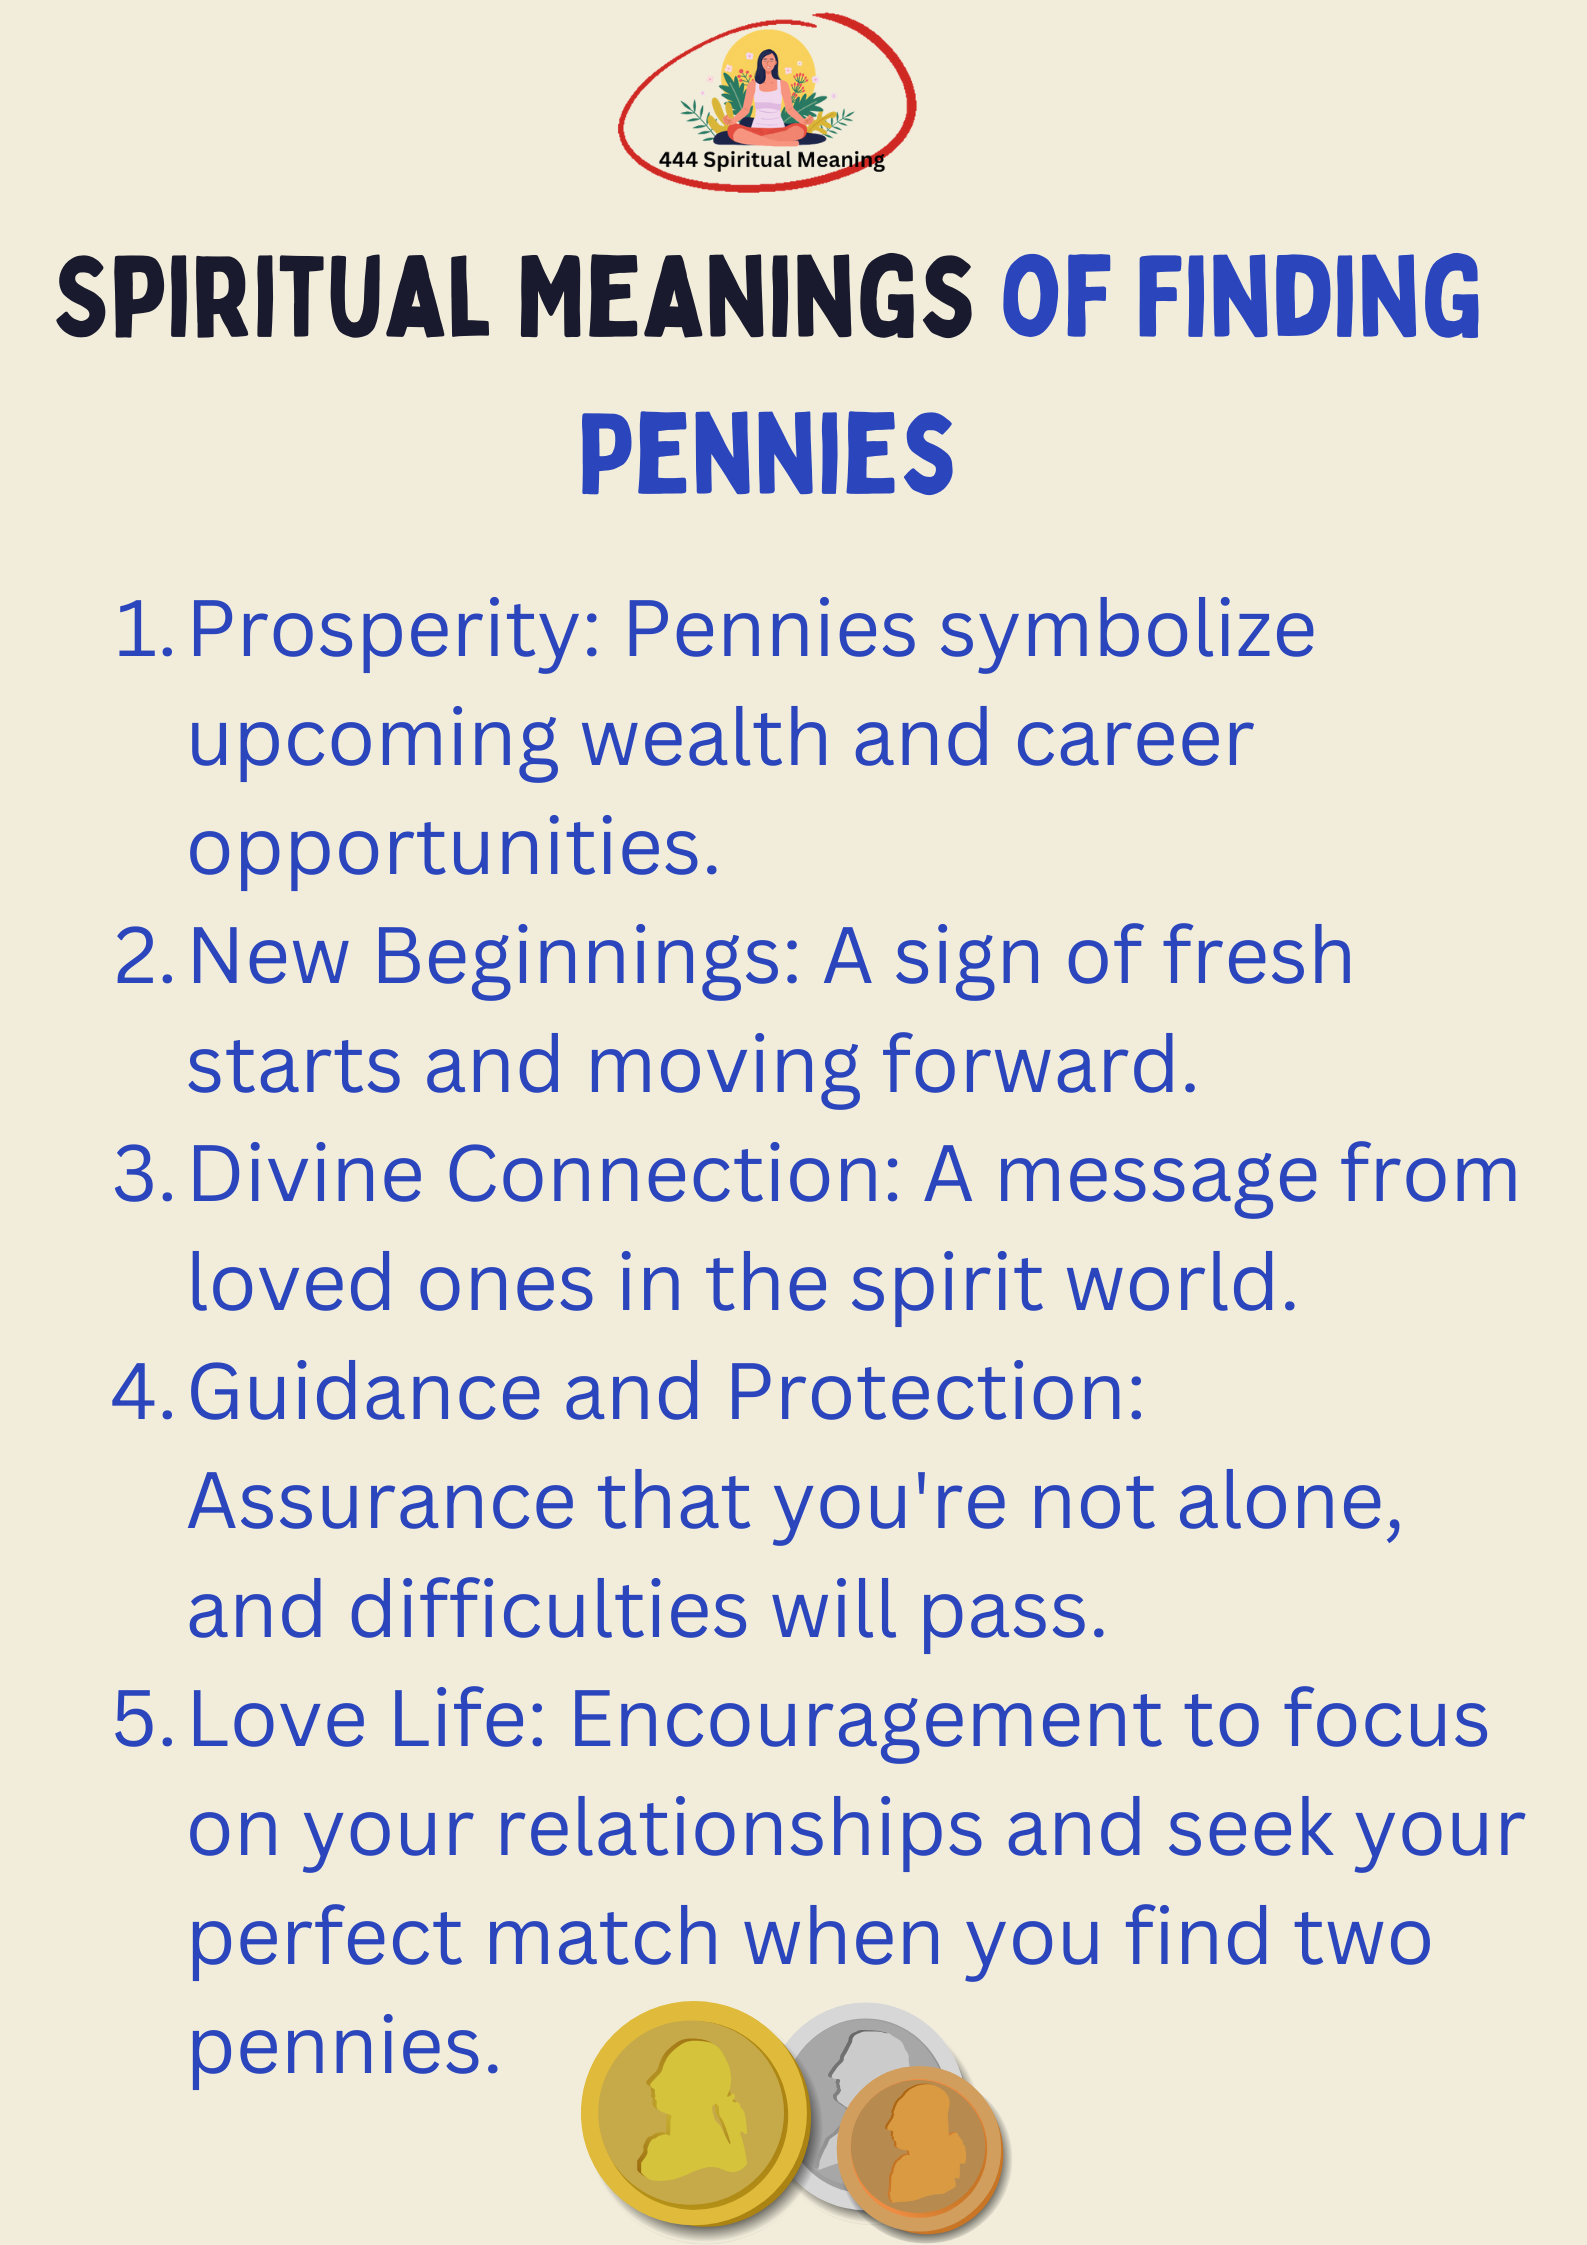 Spiritual Meanings of Finding Pennies